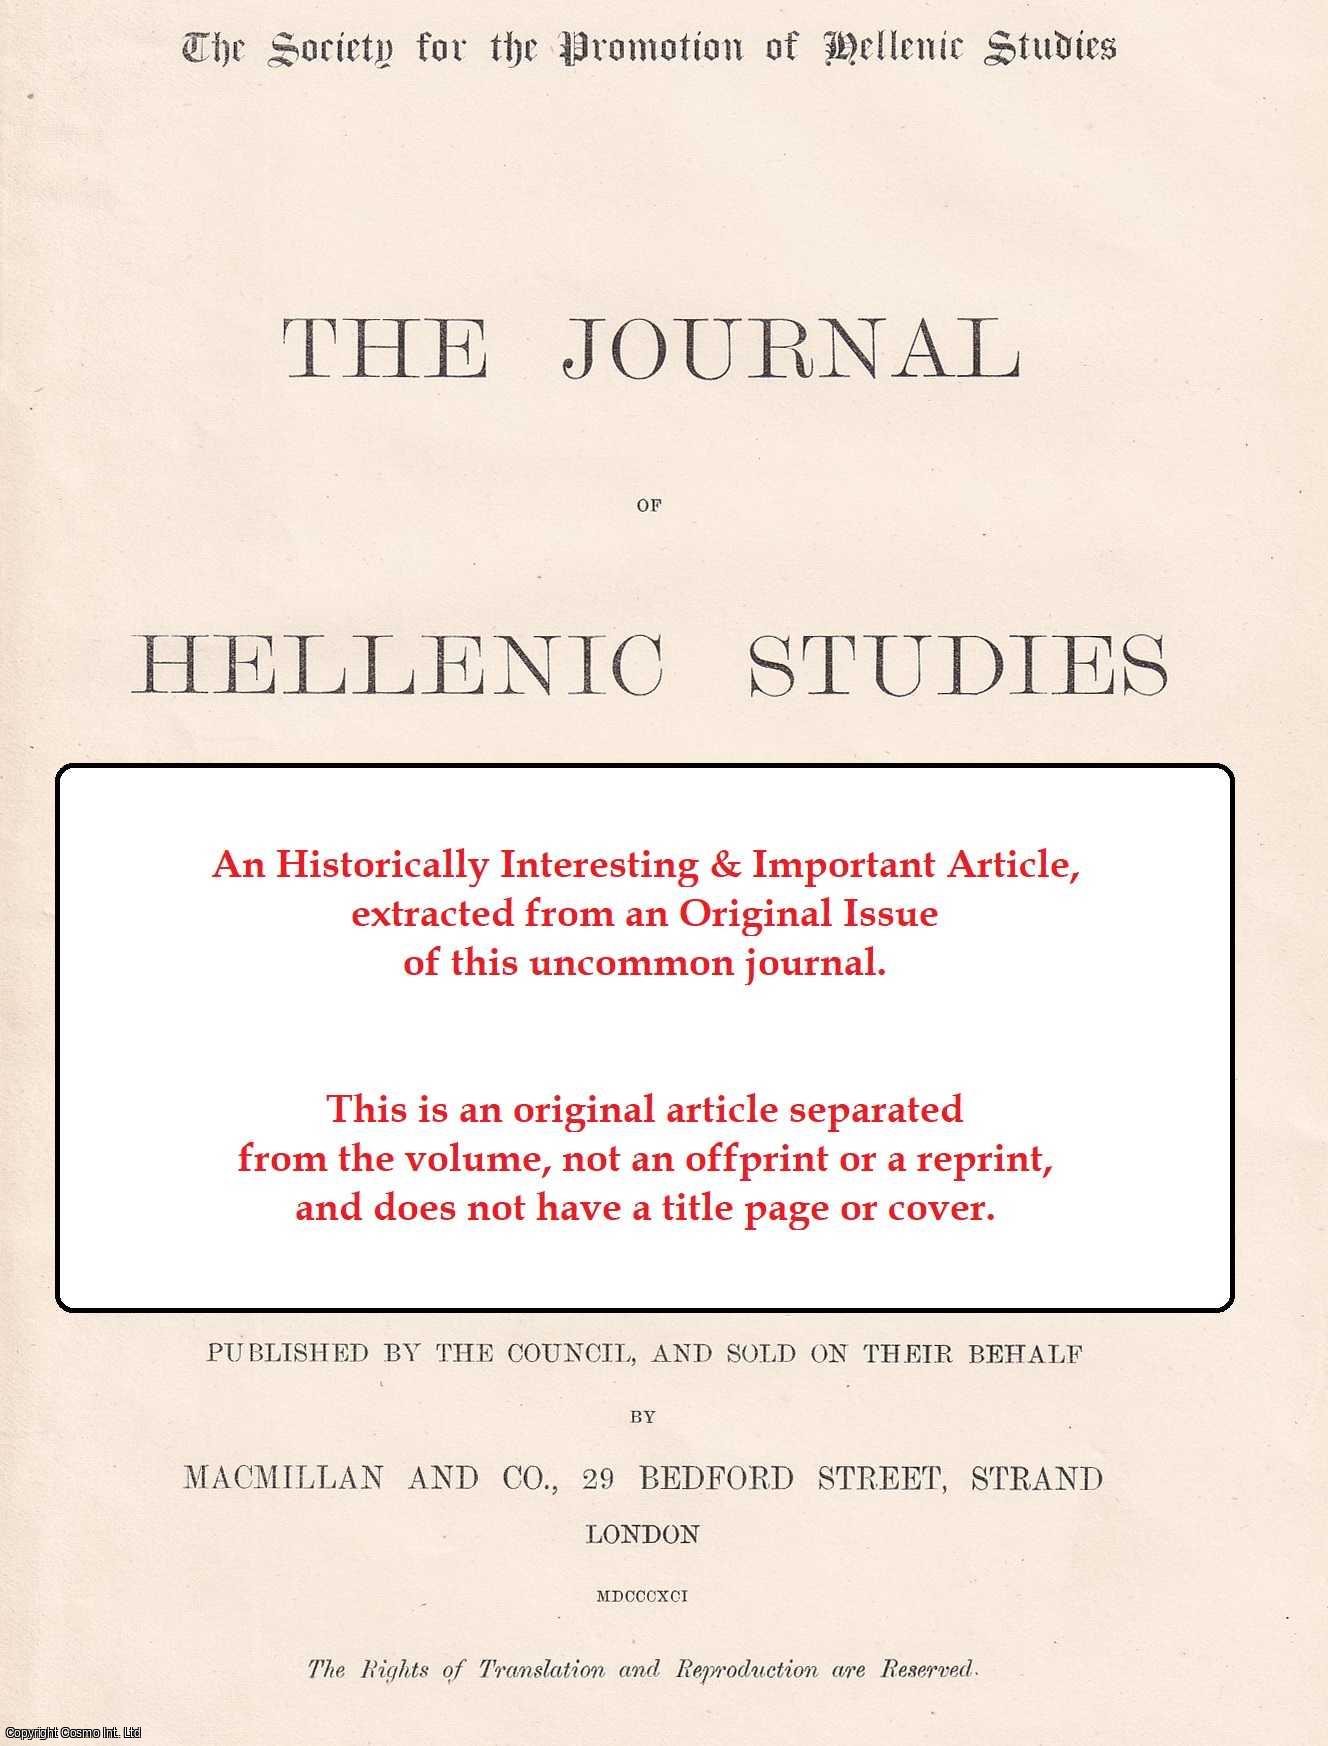 A.W. Verrall - Death and the Horse. An uncommon original article from the journal of Hellenic studies, 1898.